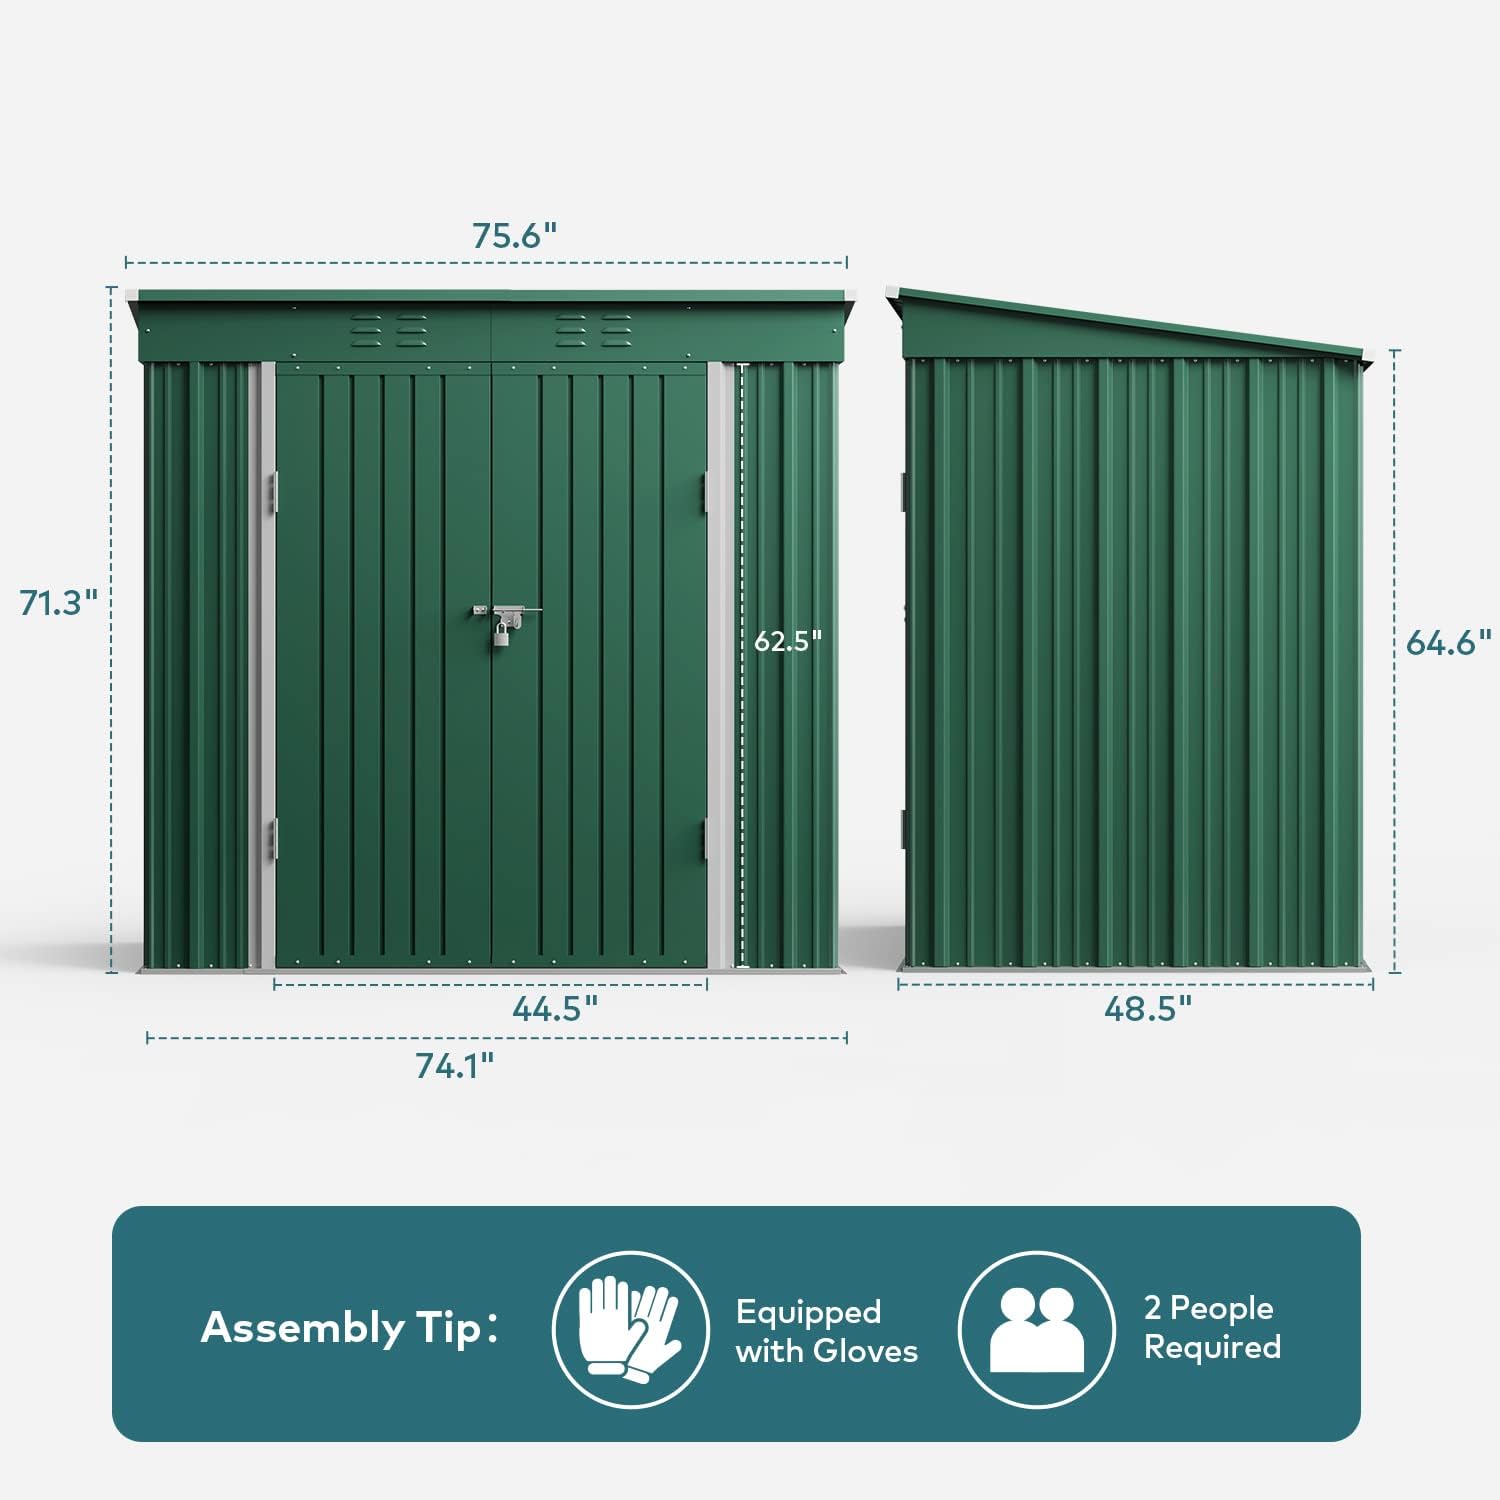 Outdoor Storage Shed, 6' x 4' Outdoor Storage Shed Clearance for Backyard Patio Lawn, Waterproof Metal Shed Outdoor Storage with Double Lockable Doors and Base Frame, Green - image 2 of 8